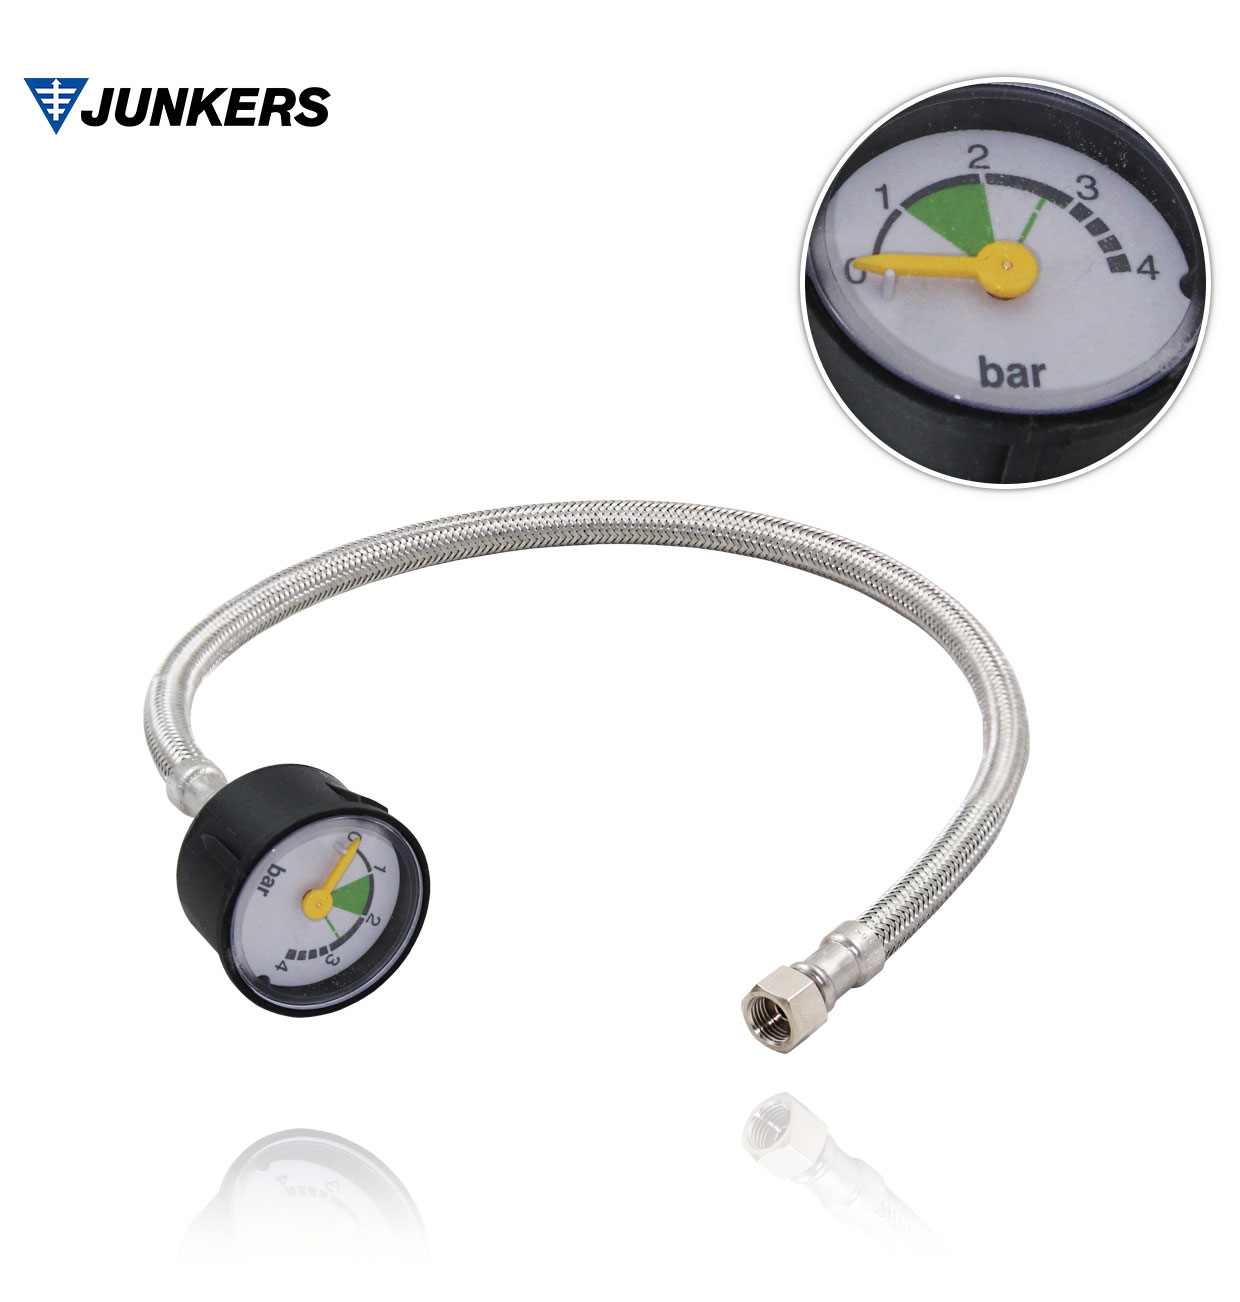 JUNKERS 8707208004 MANOMETER WITH HOSE